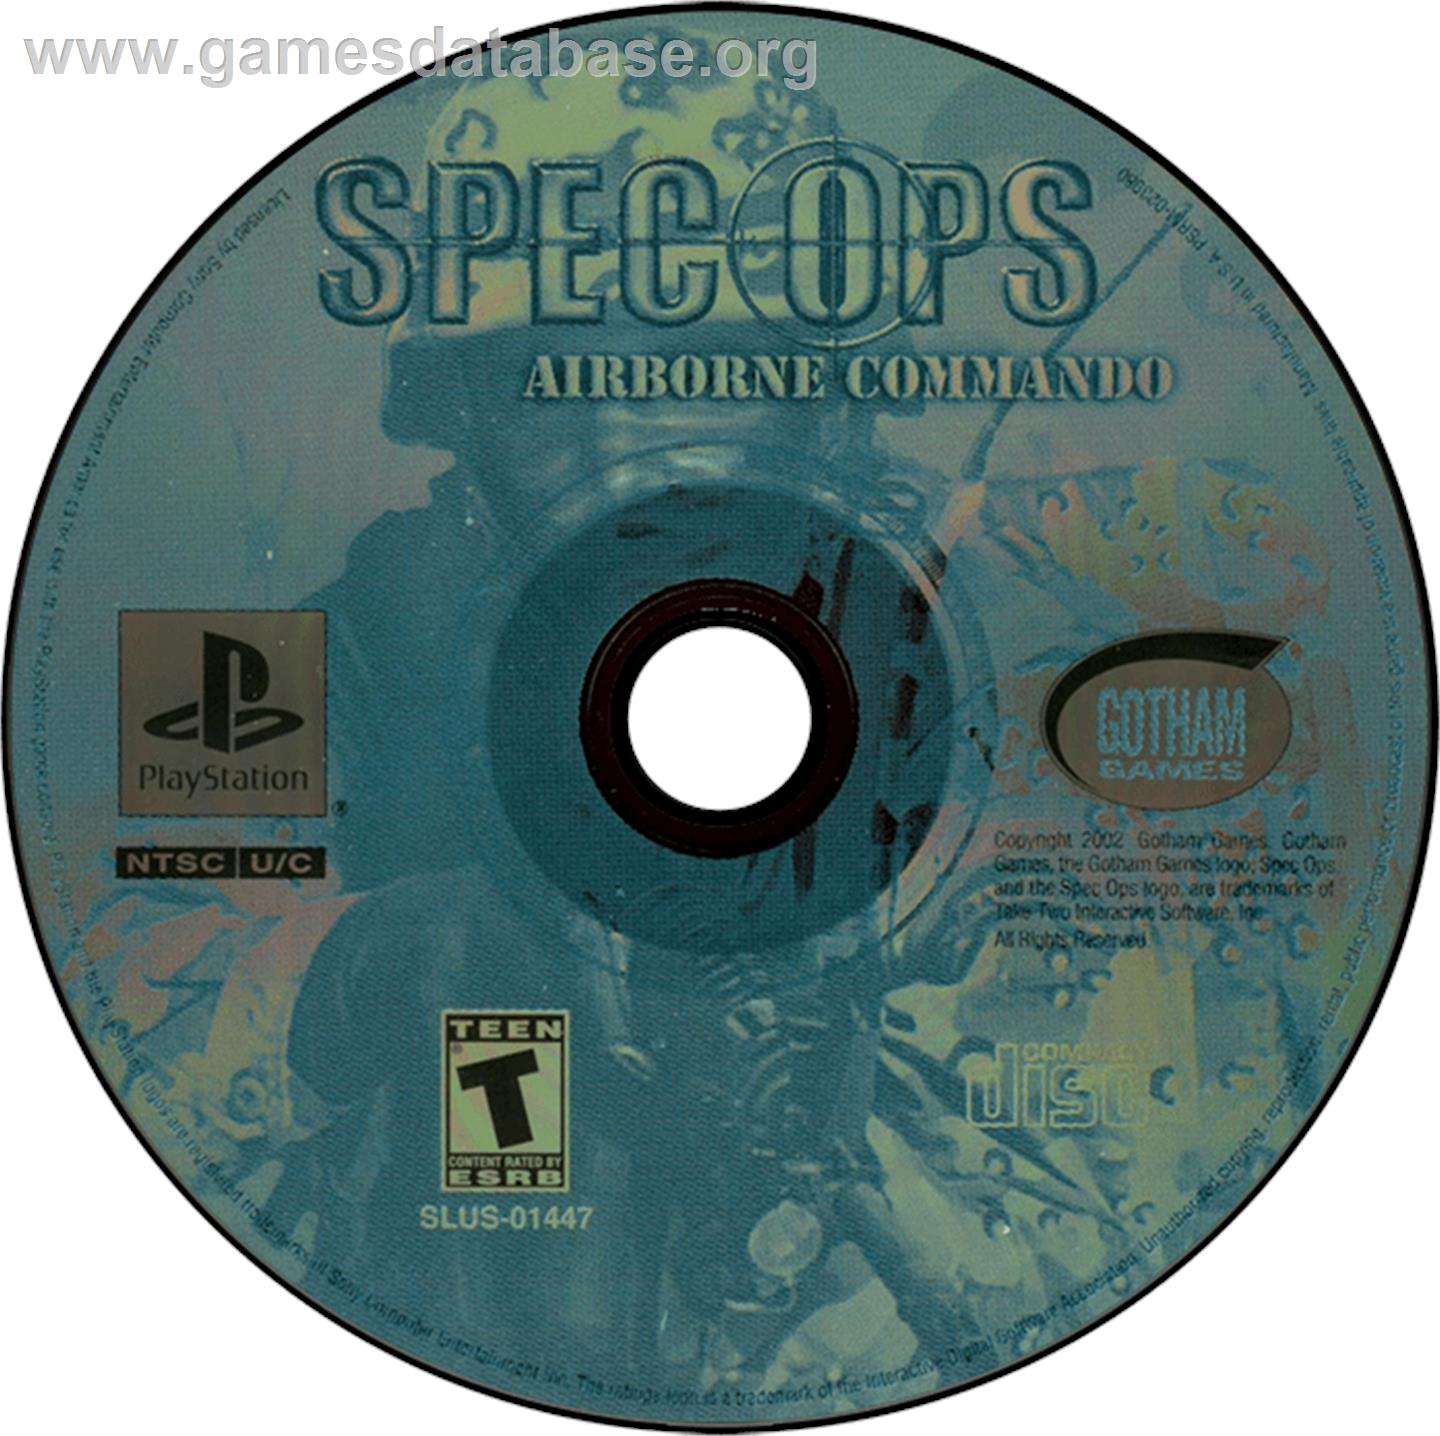 Spec Ops: Airborne Commando - Sony Playstation - Artwork - Disc